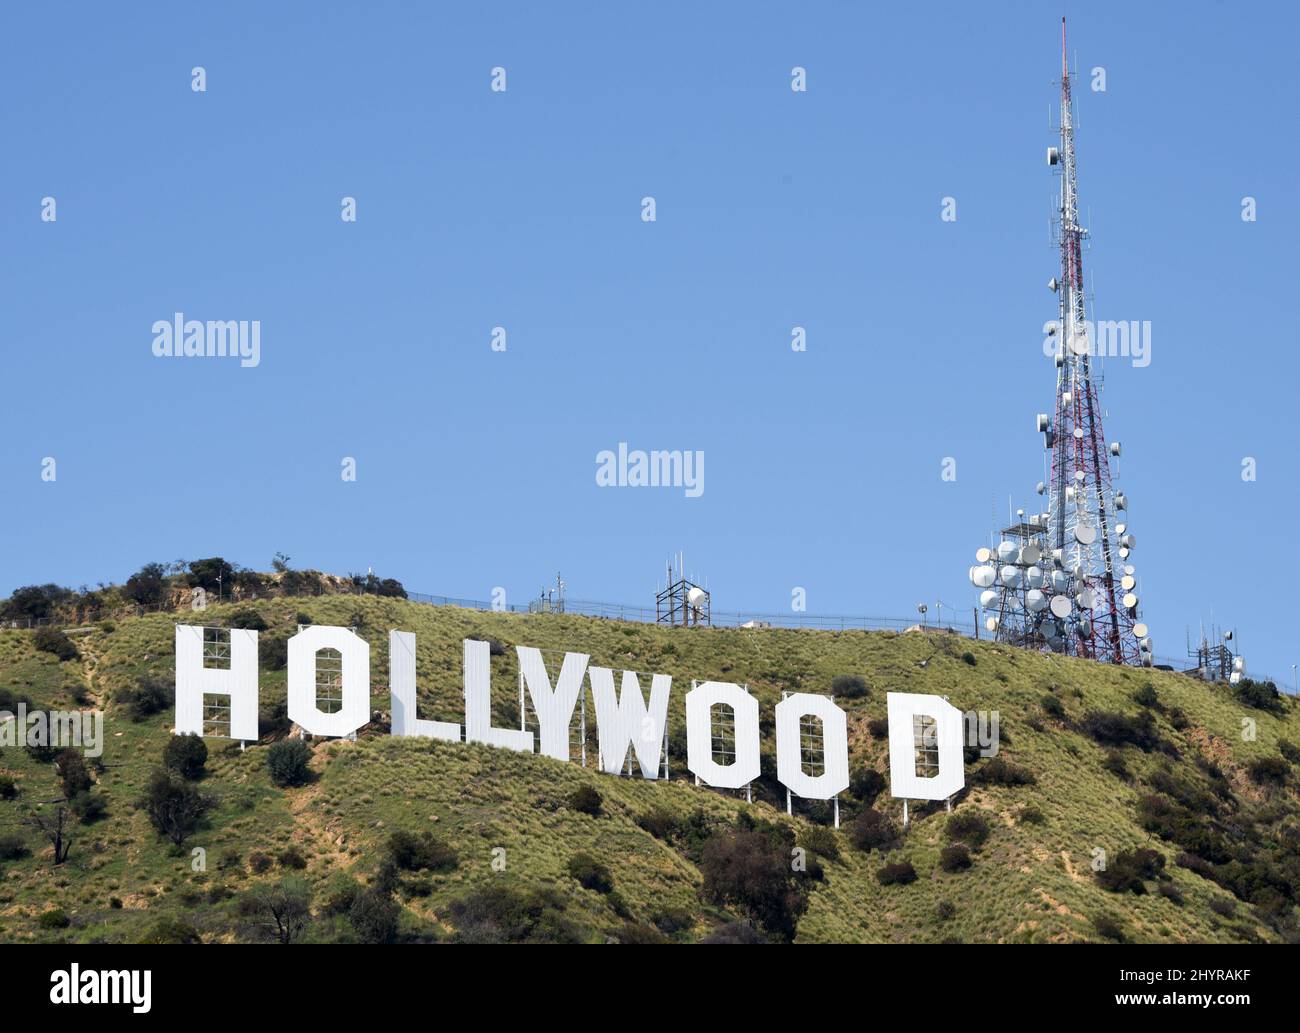 Hollywood Sign during the Hollywood Covid 19 lockdown on April 24, 2020 in Hollywood, CA. Stock Photo